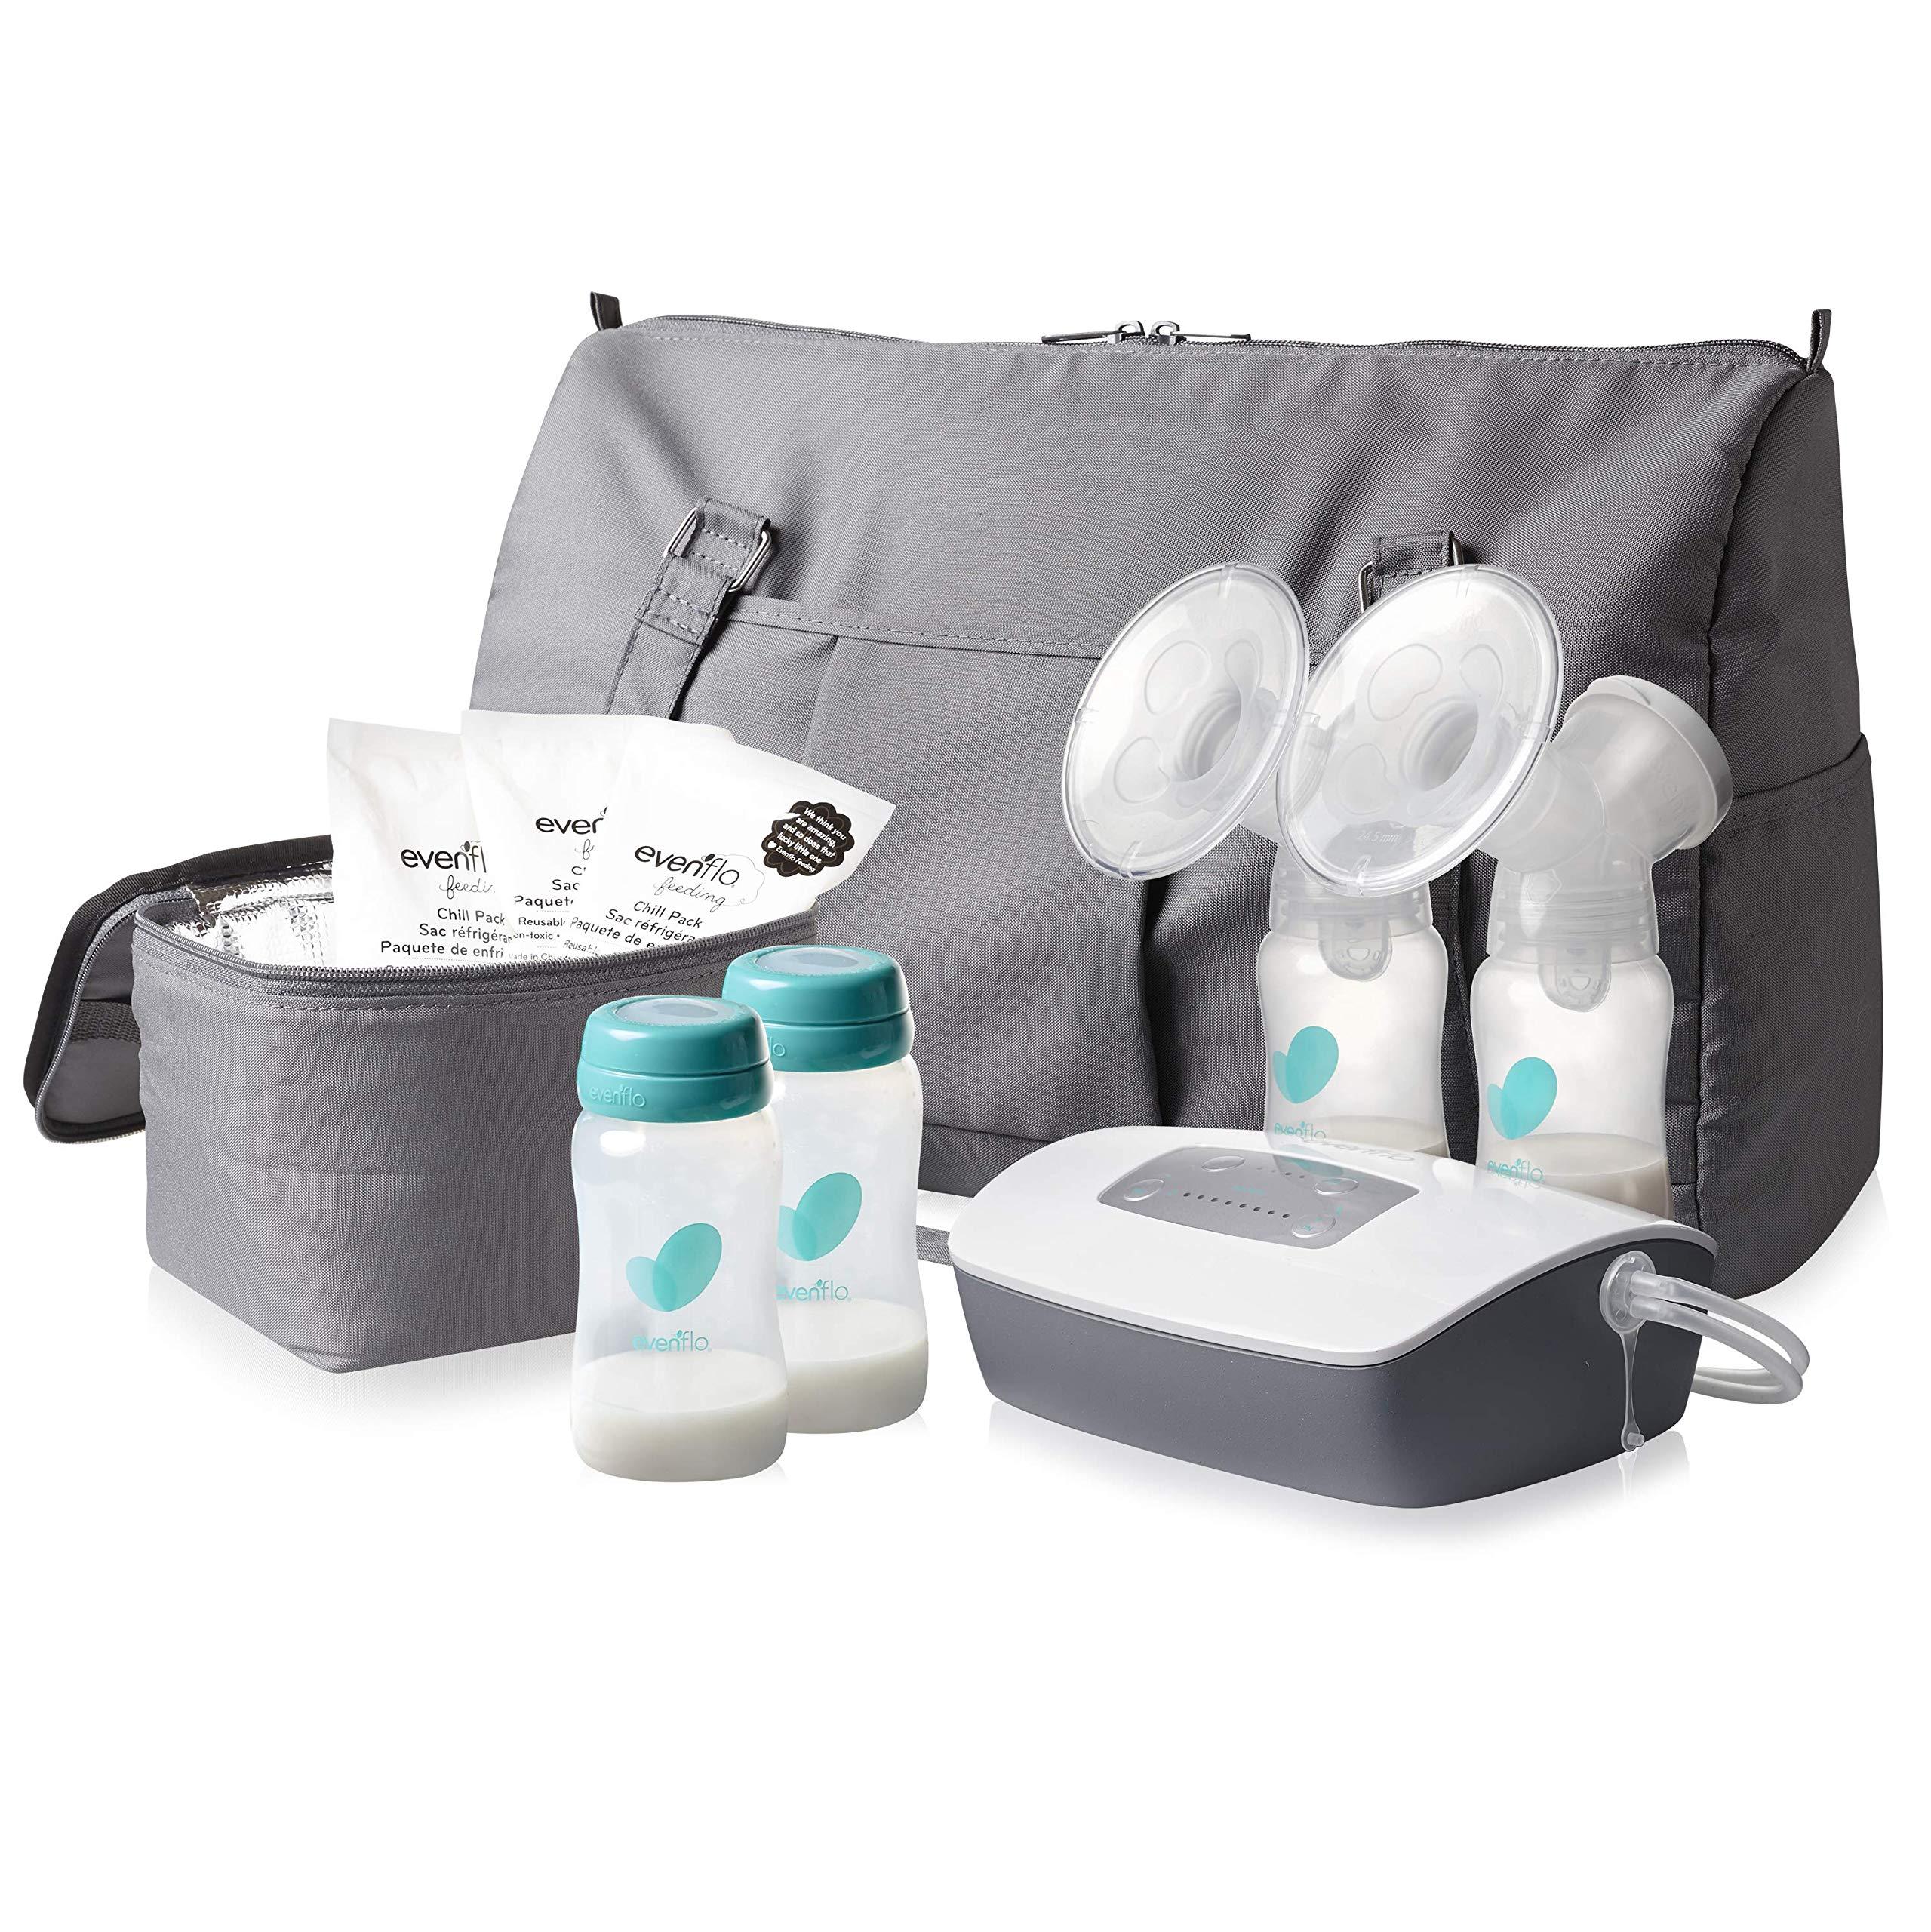 Evenflo Deluxe Advanced Double Electric Breast Pump 10 51beedc08c364b0e84efc70ee2b23c5d 51beedc08c364b0e84efc70ee2b23c5d